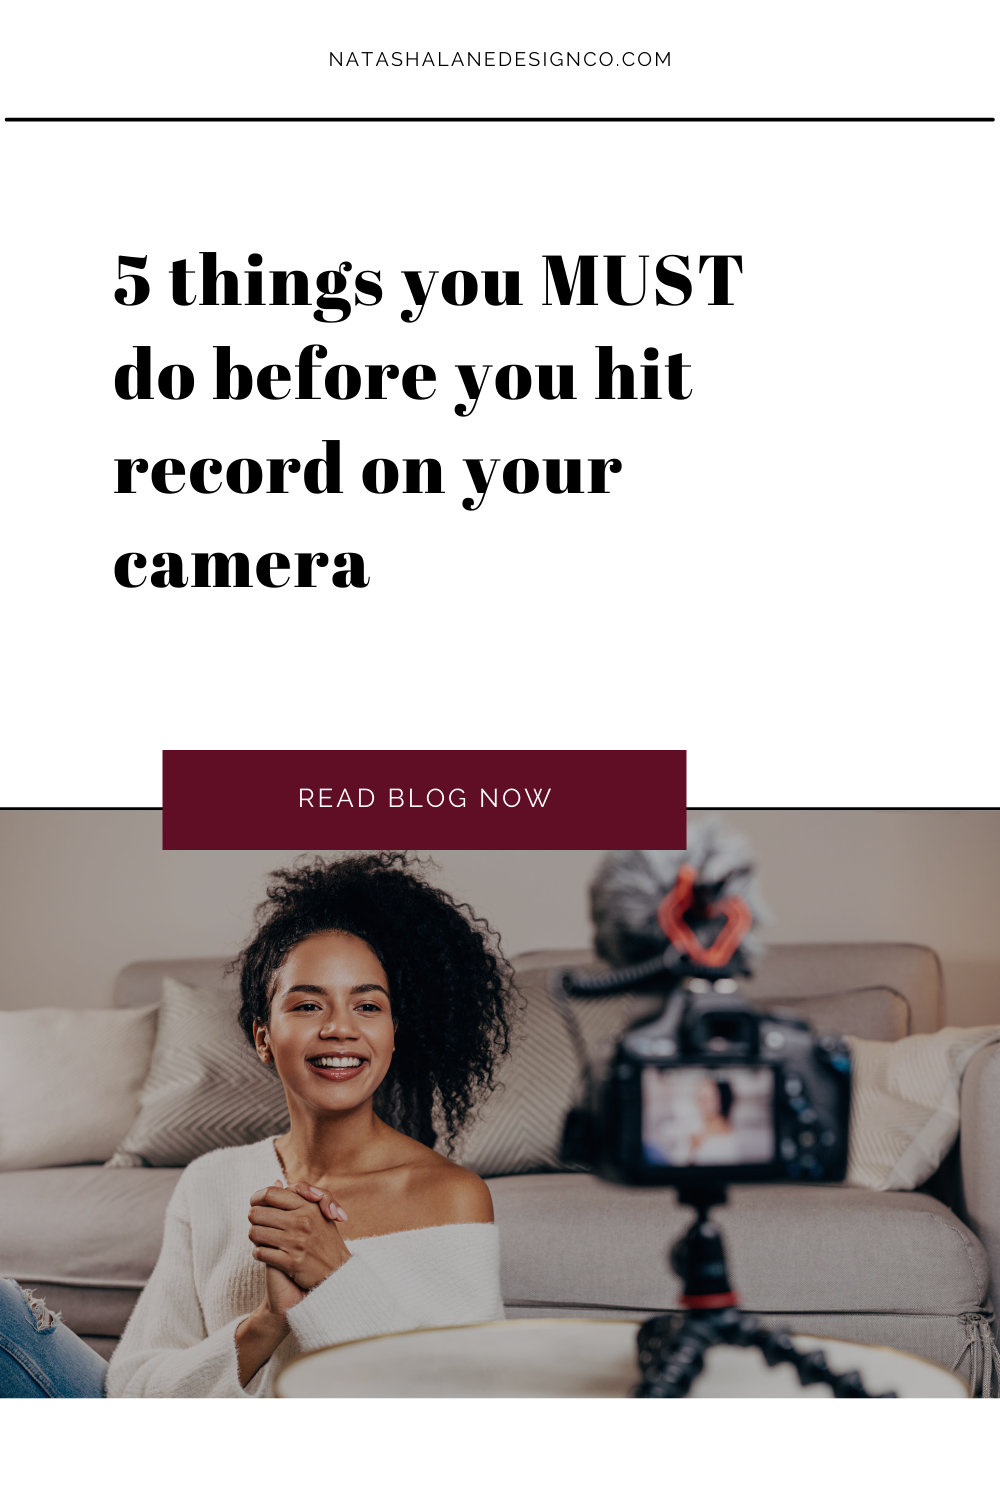 5 things you MUST do before you hit record on your camera